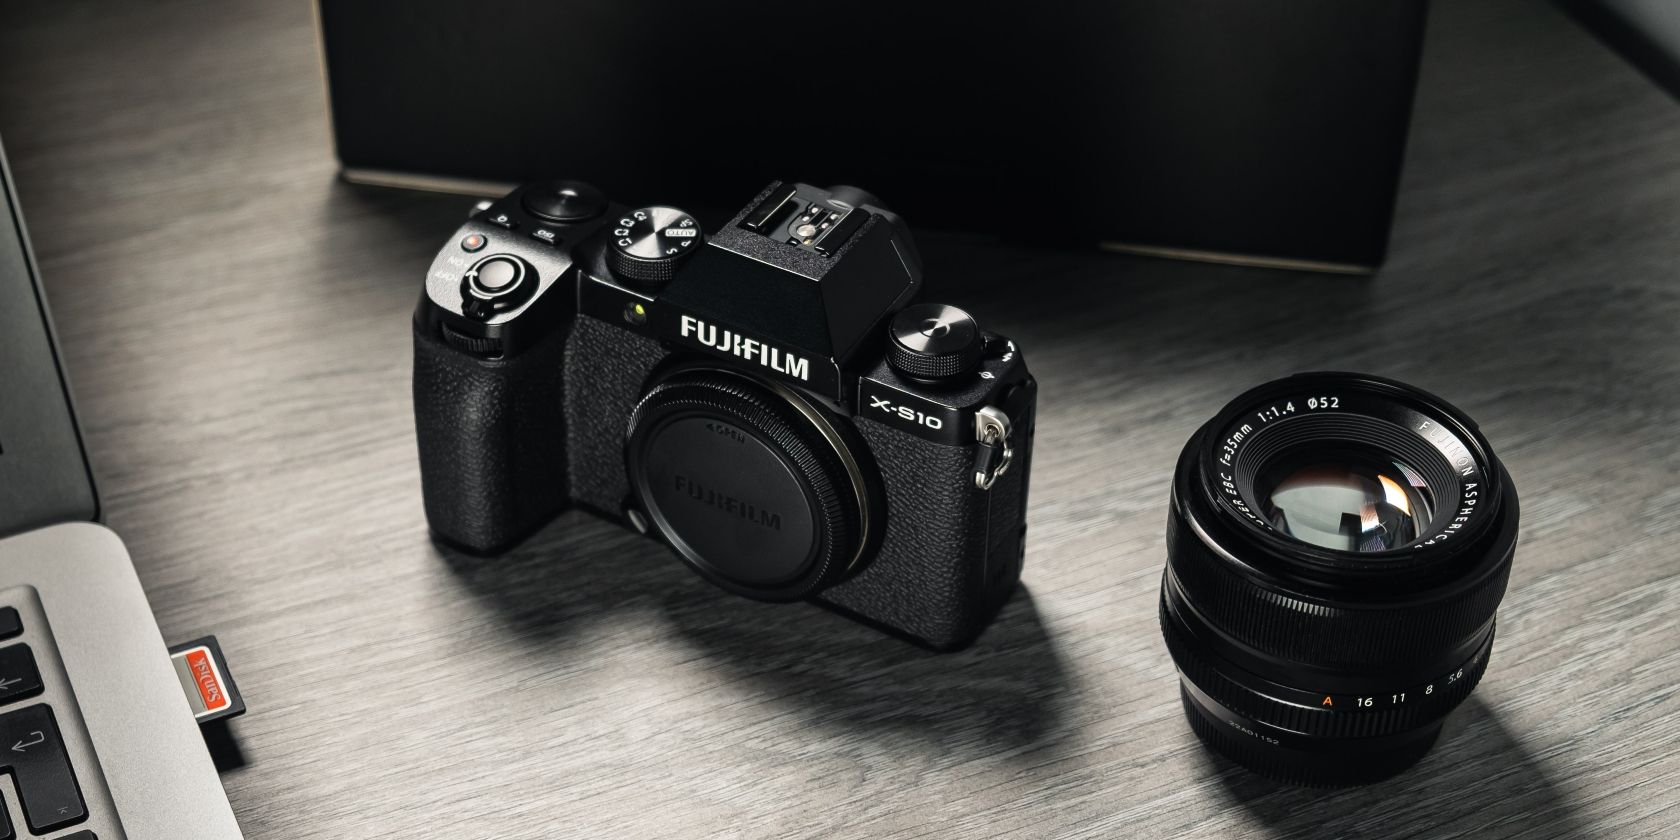 photo of a fujifilm camera and lens on the table